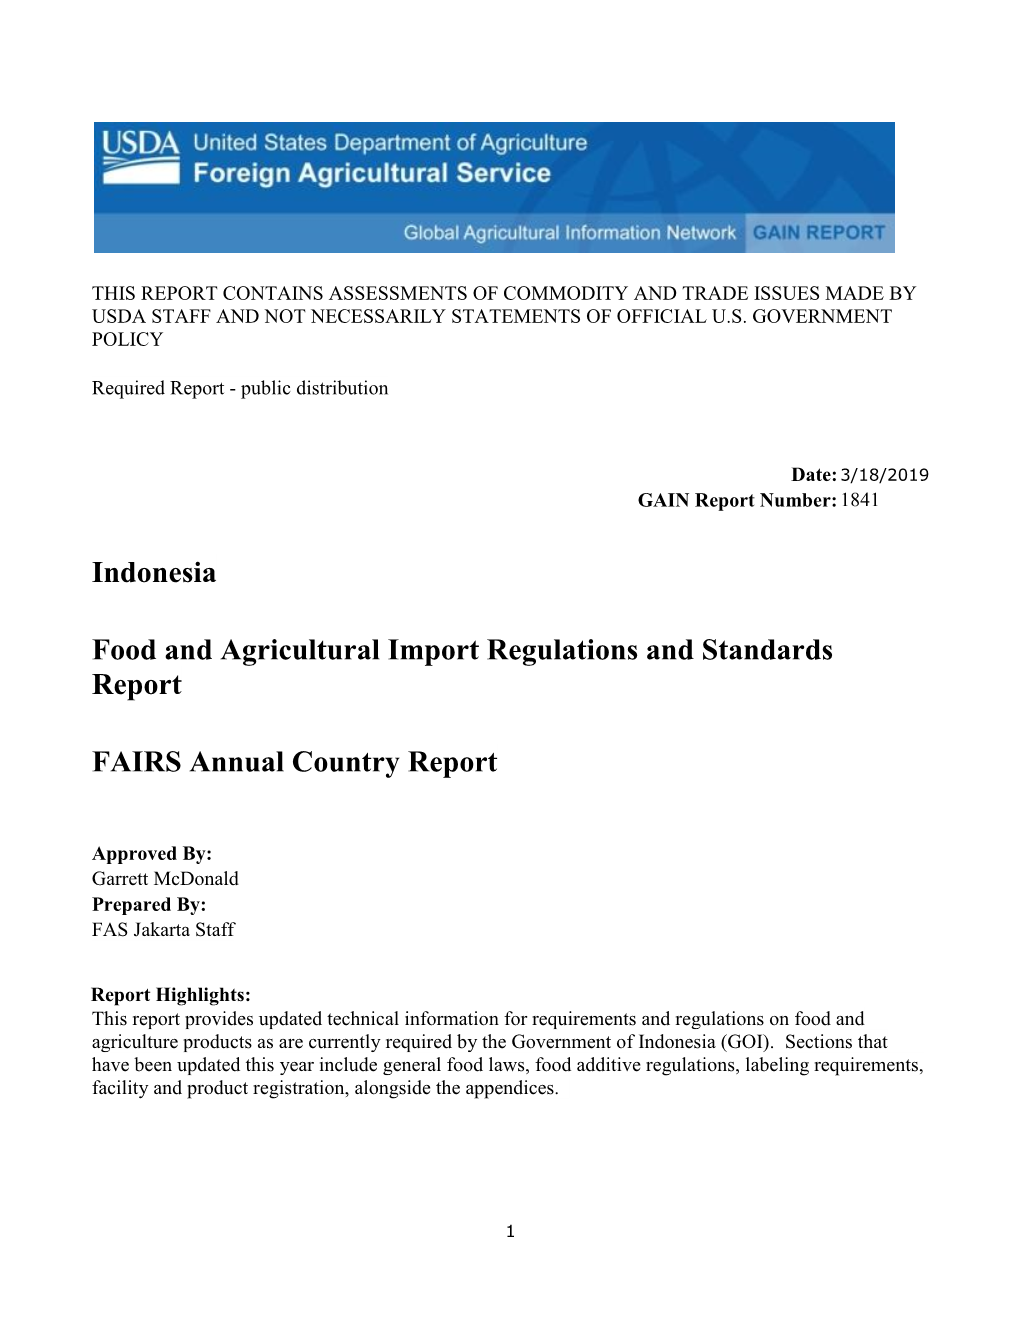 Indonesia Food and Agricultural Import Regulations and Standards